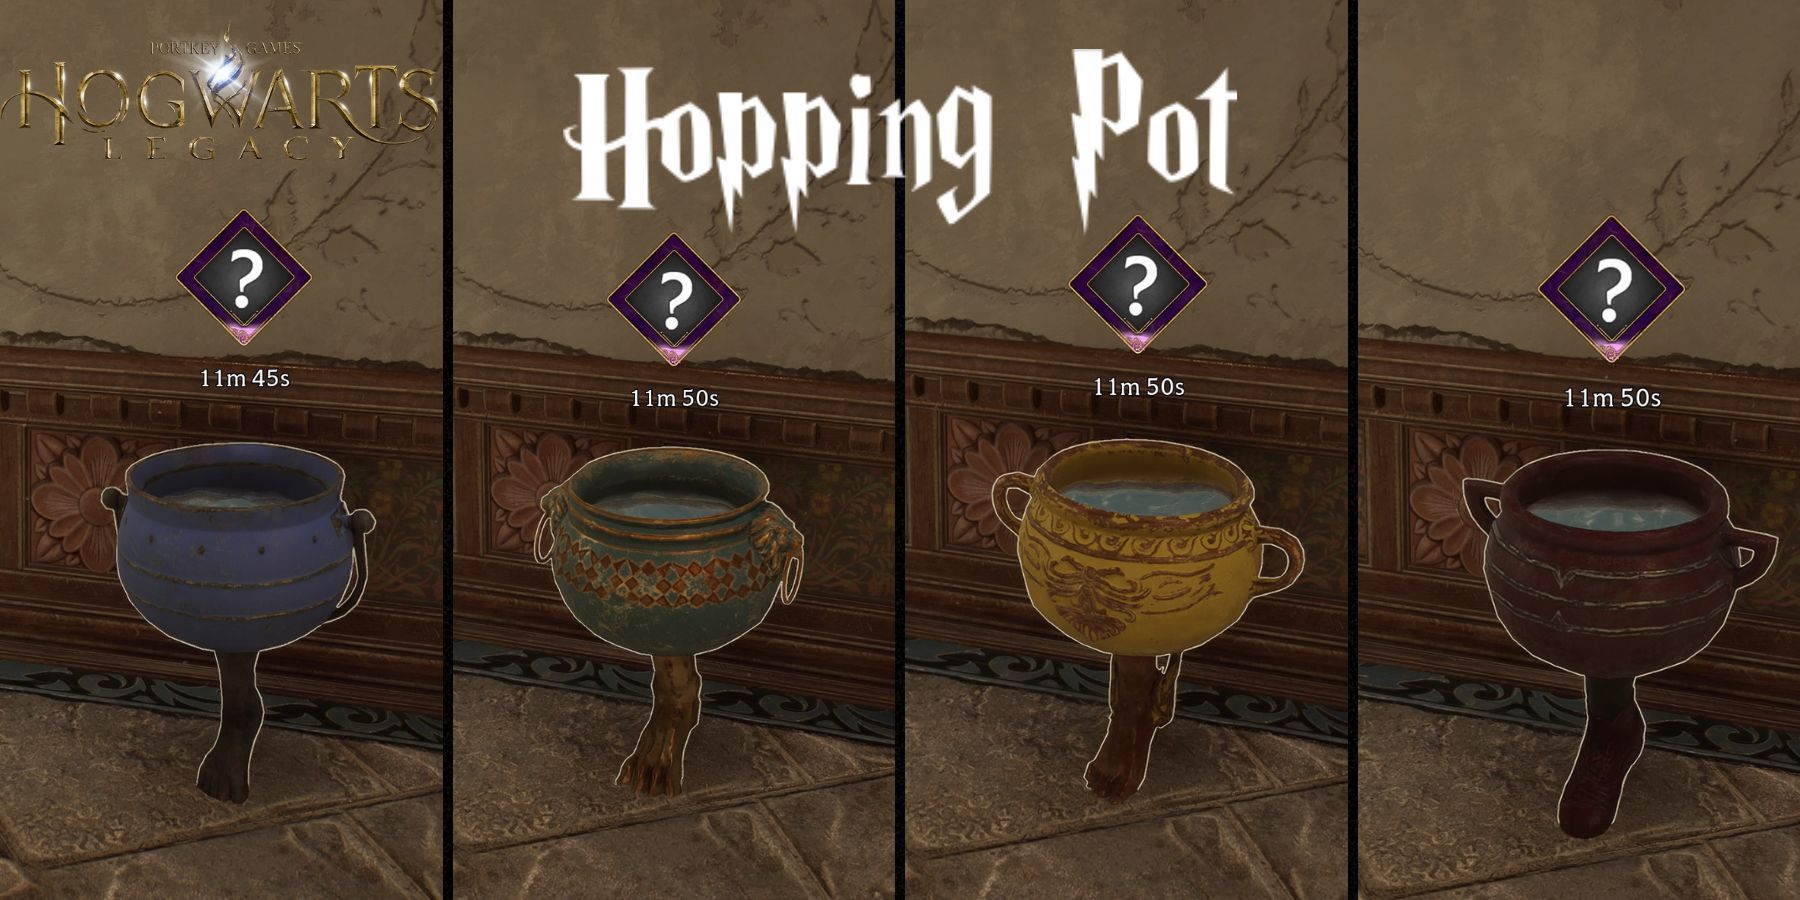 hogwarts legacy how to get hopping pots